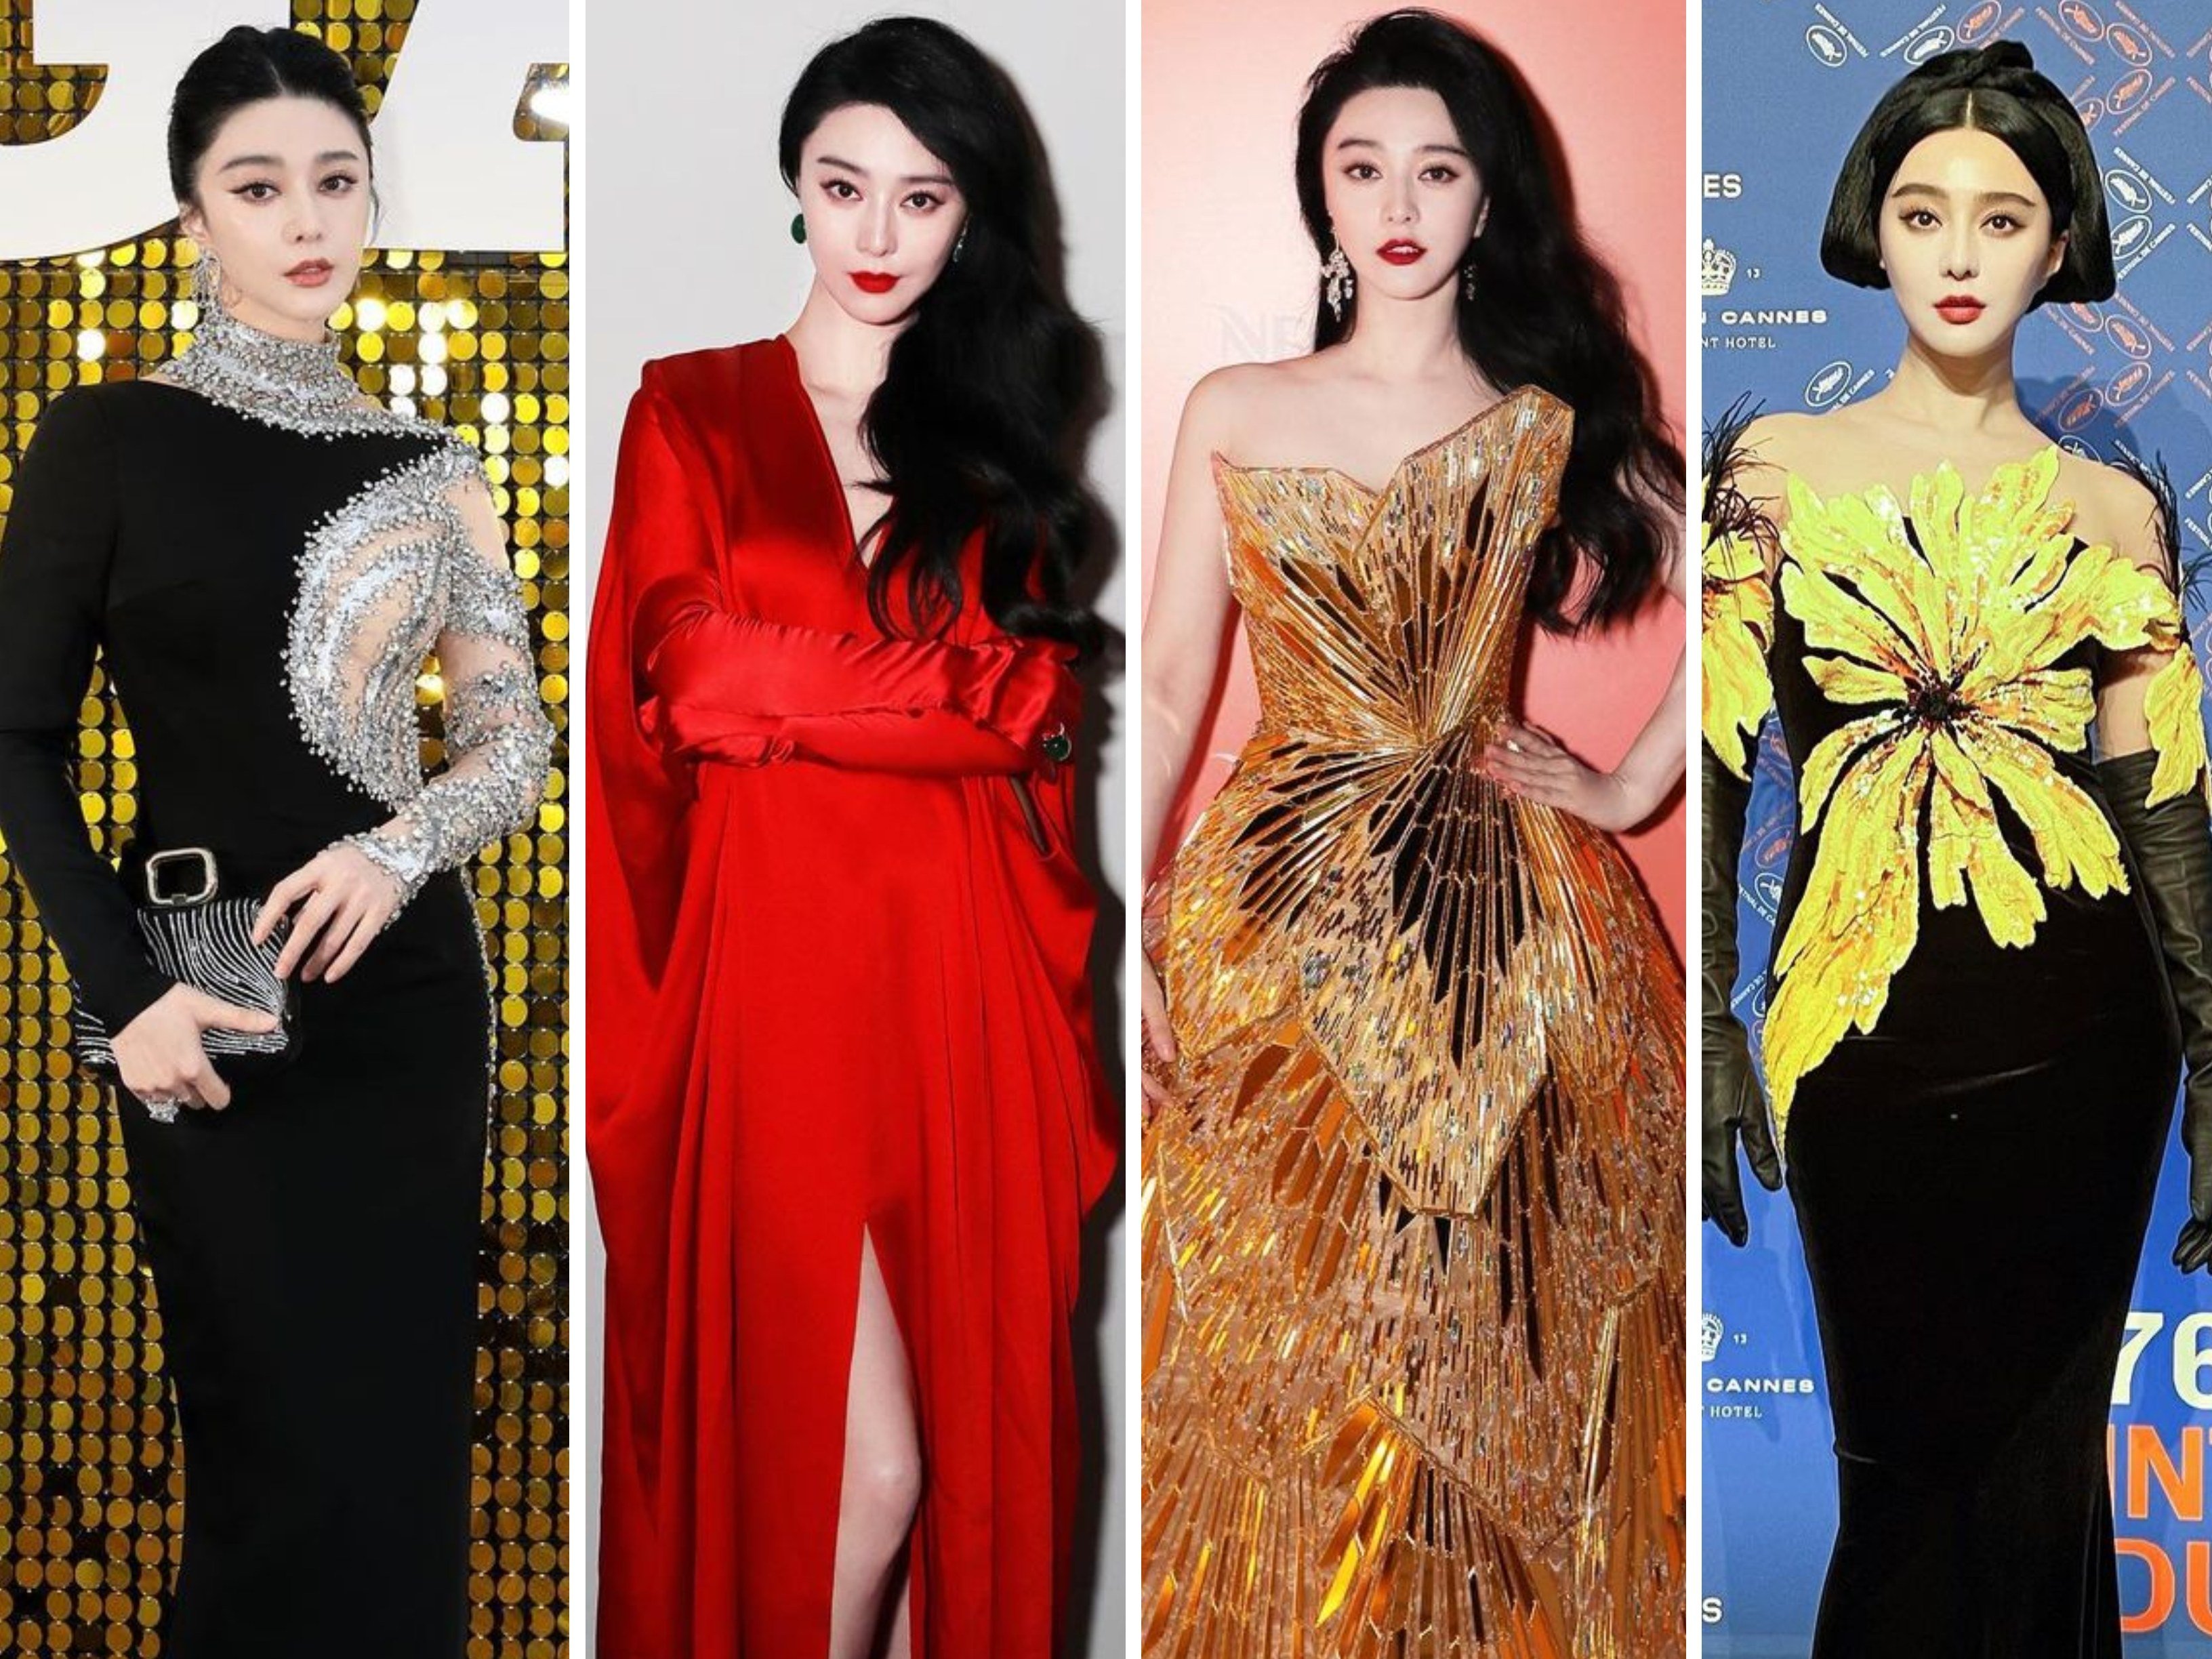 Fan Bingbing positively crushed the Cannes Film Festival red carpets this year, showing up in no fewer than nine different looks. Photo: @bingbing_fan/Instagram